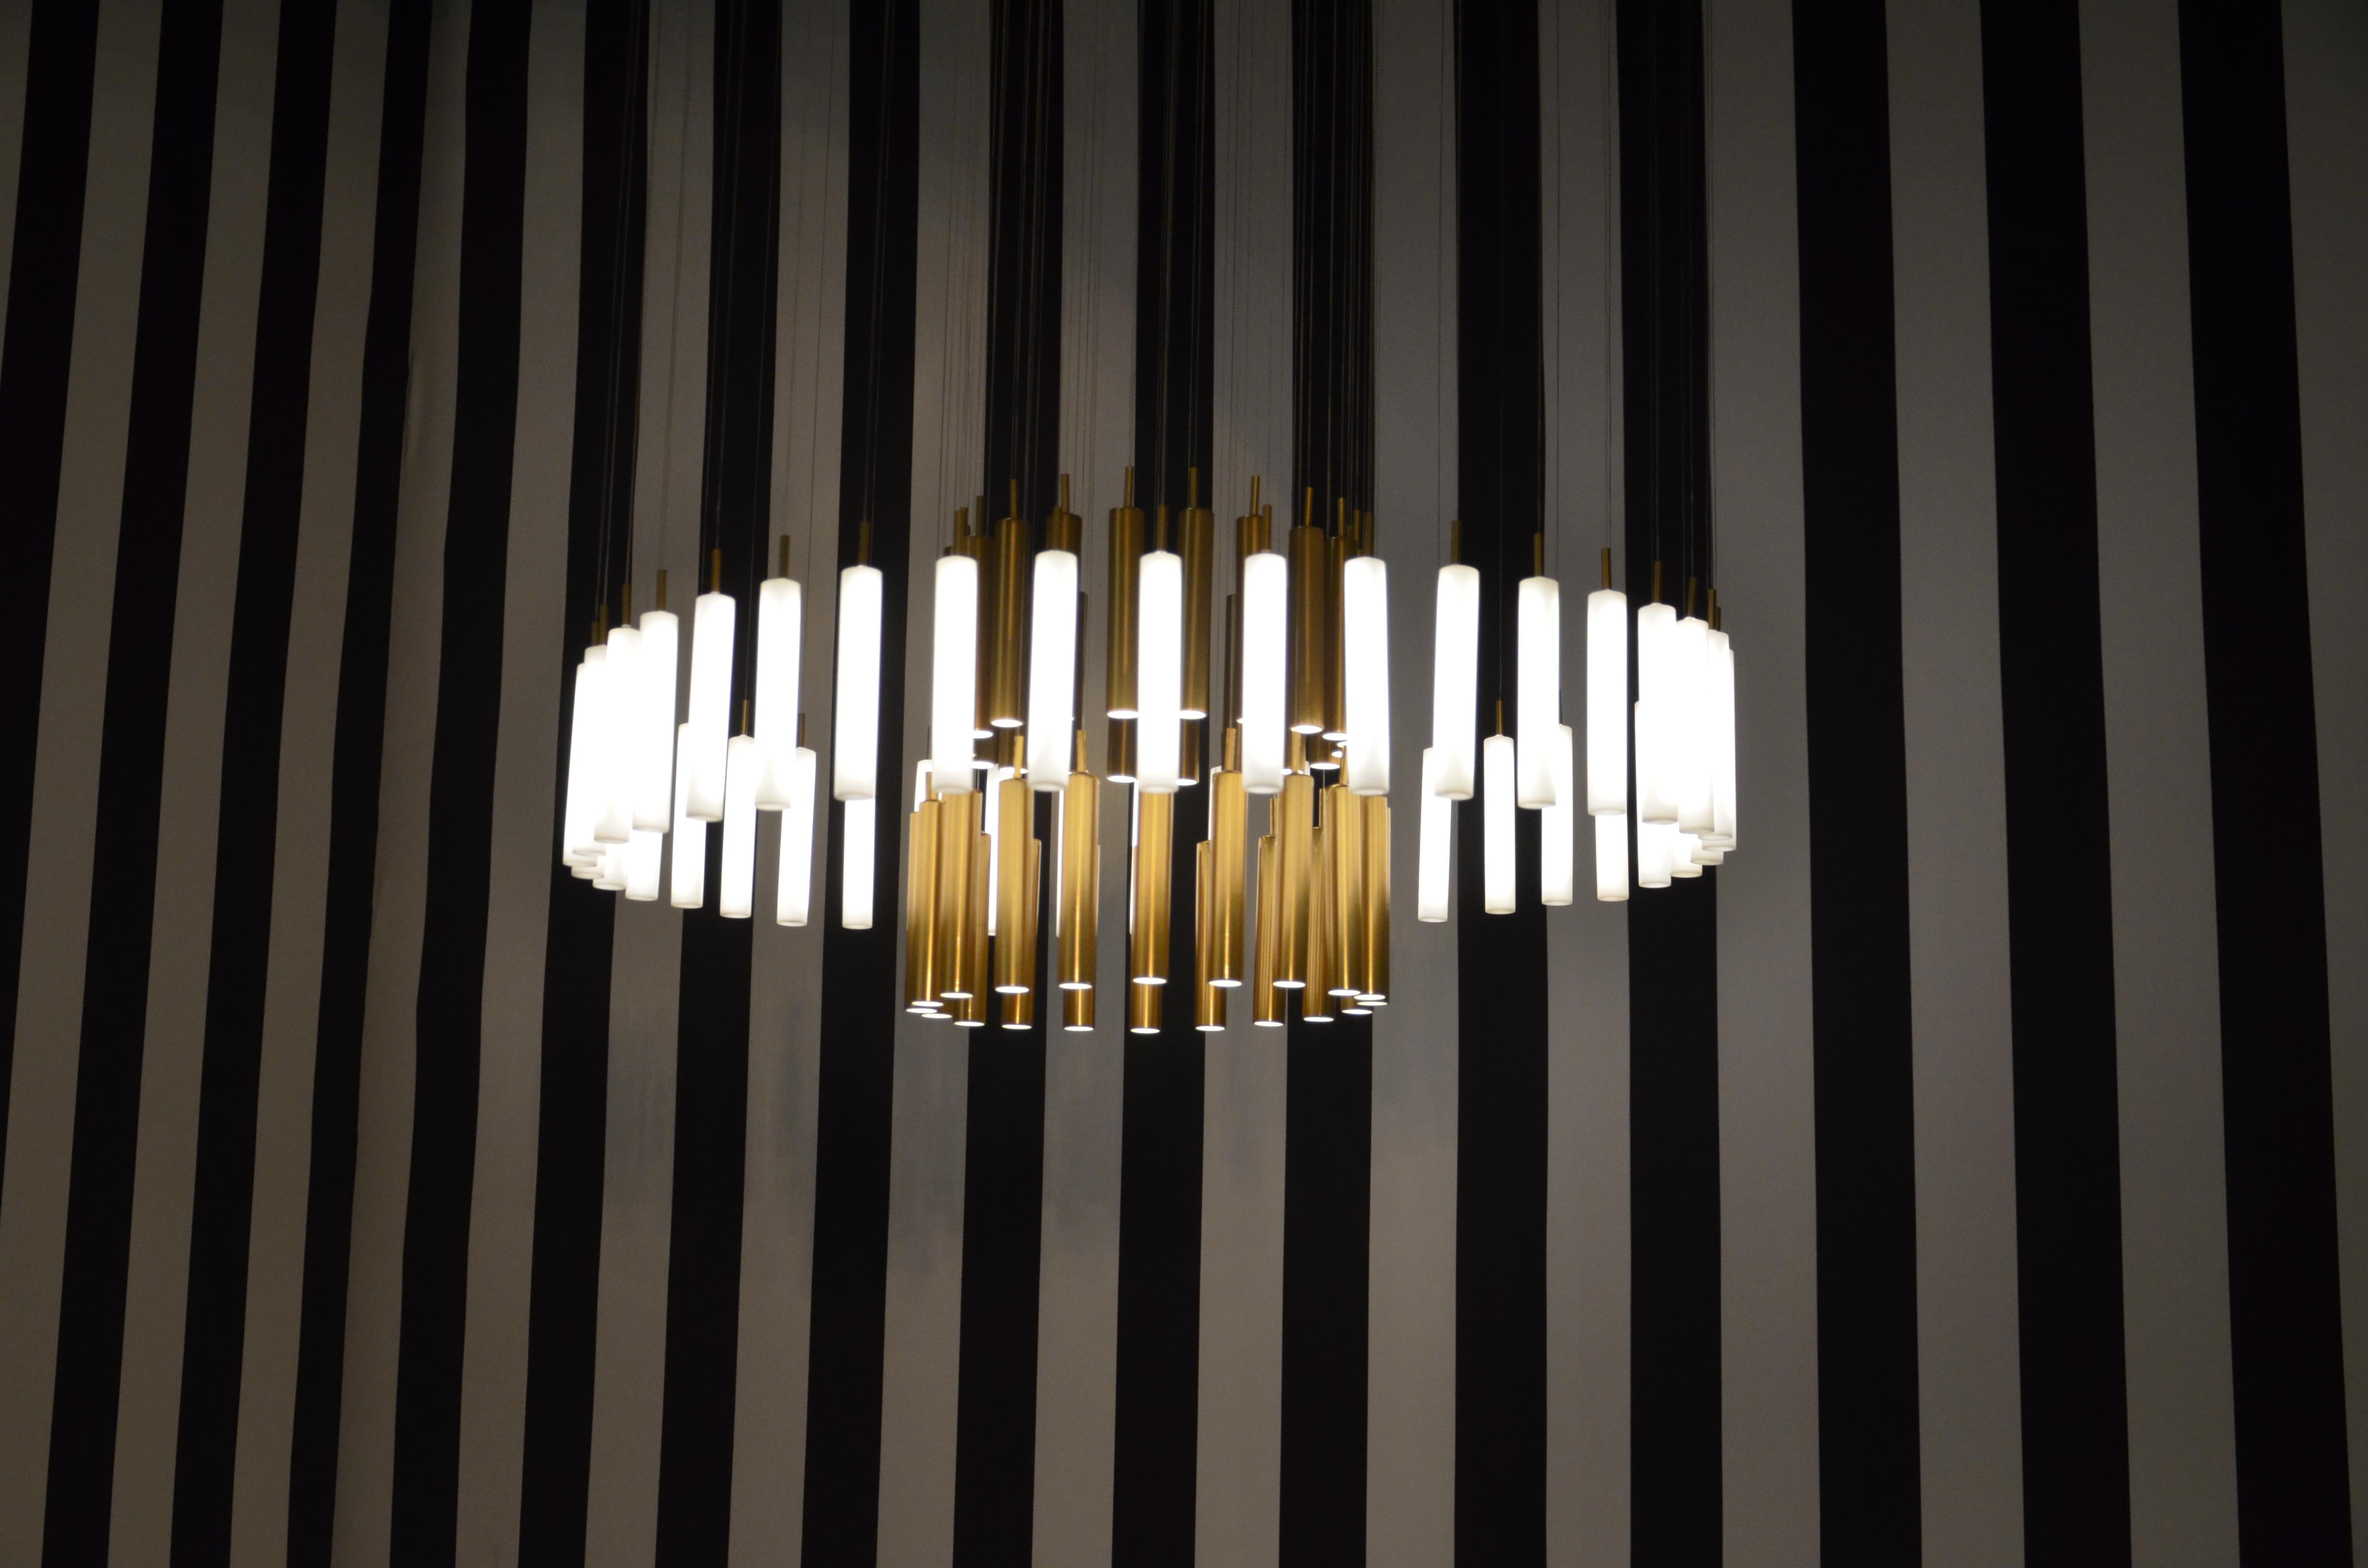 The Art-Déco rainy day bespoke chandelier is designed by Sylvie Maréchal and it is entirely manufactured in France. This chandelier is made of 80 Limoges Porcelain tubes of which 40 are fine golden tubes and 40 are white tubes. The tubes are